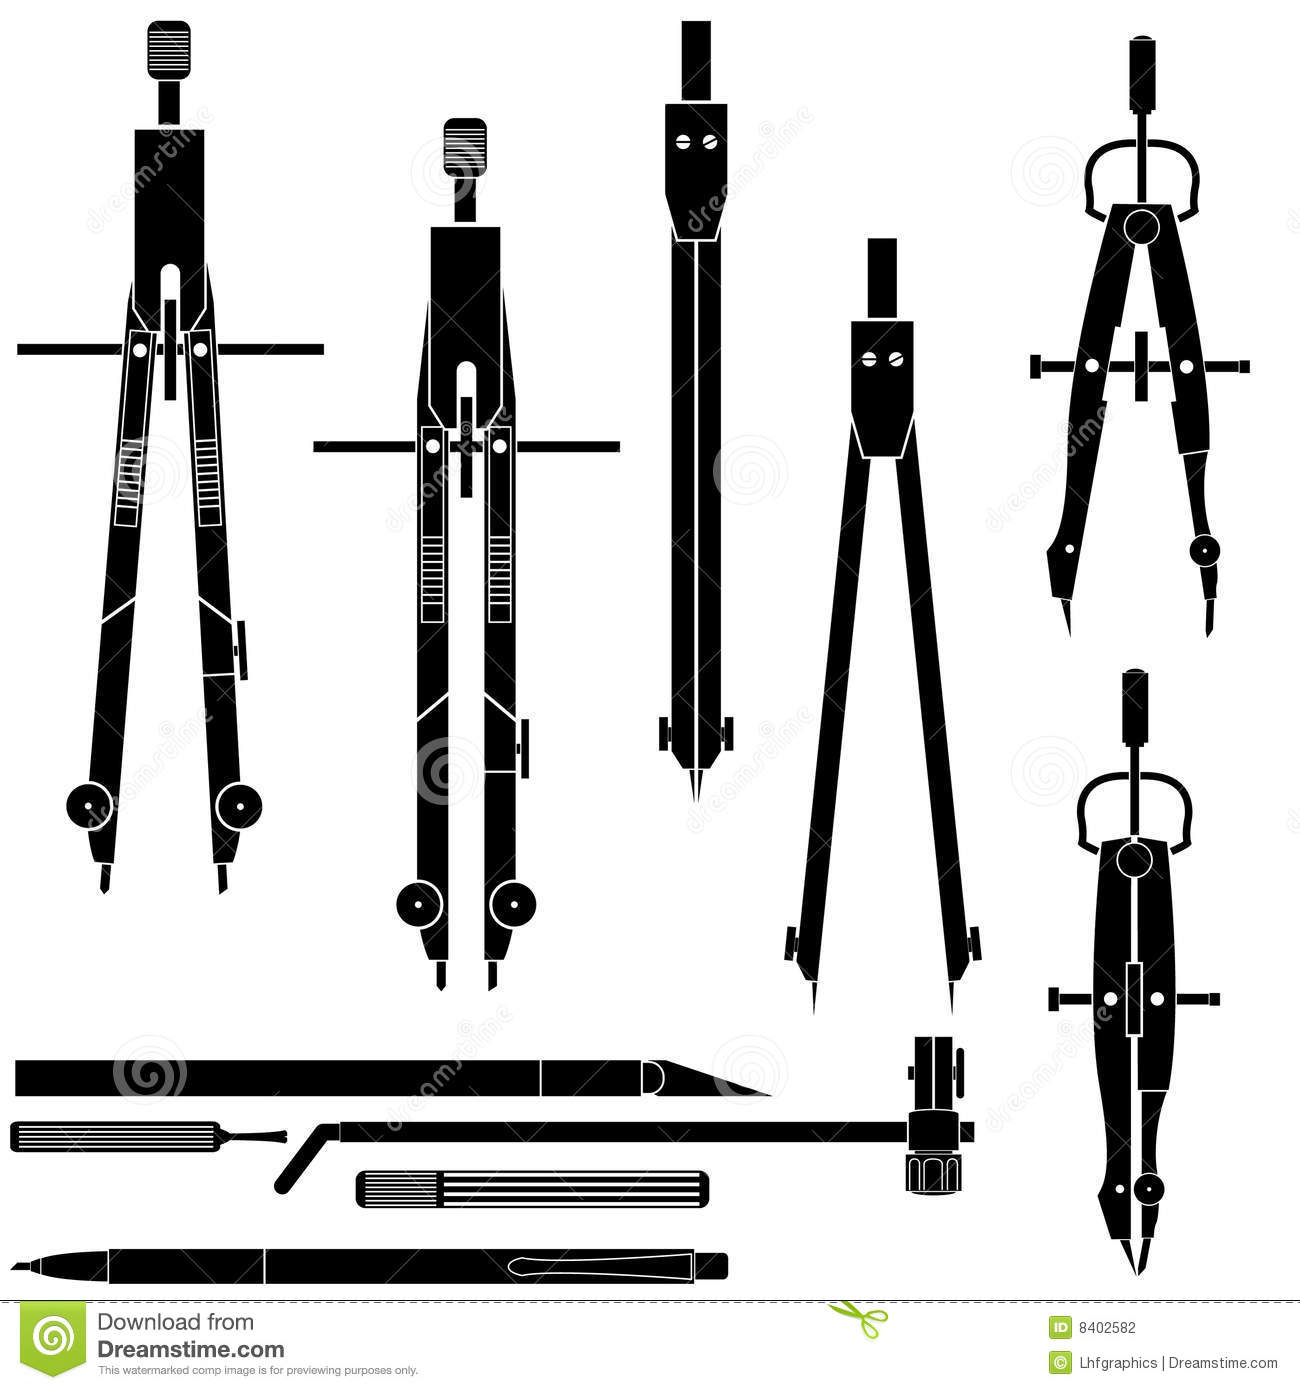 Illustration Of A Compasses Used For Drafting And Engineering Drawing